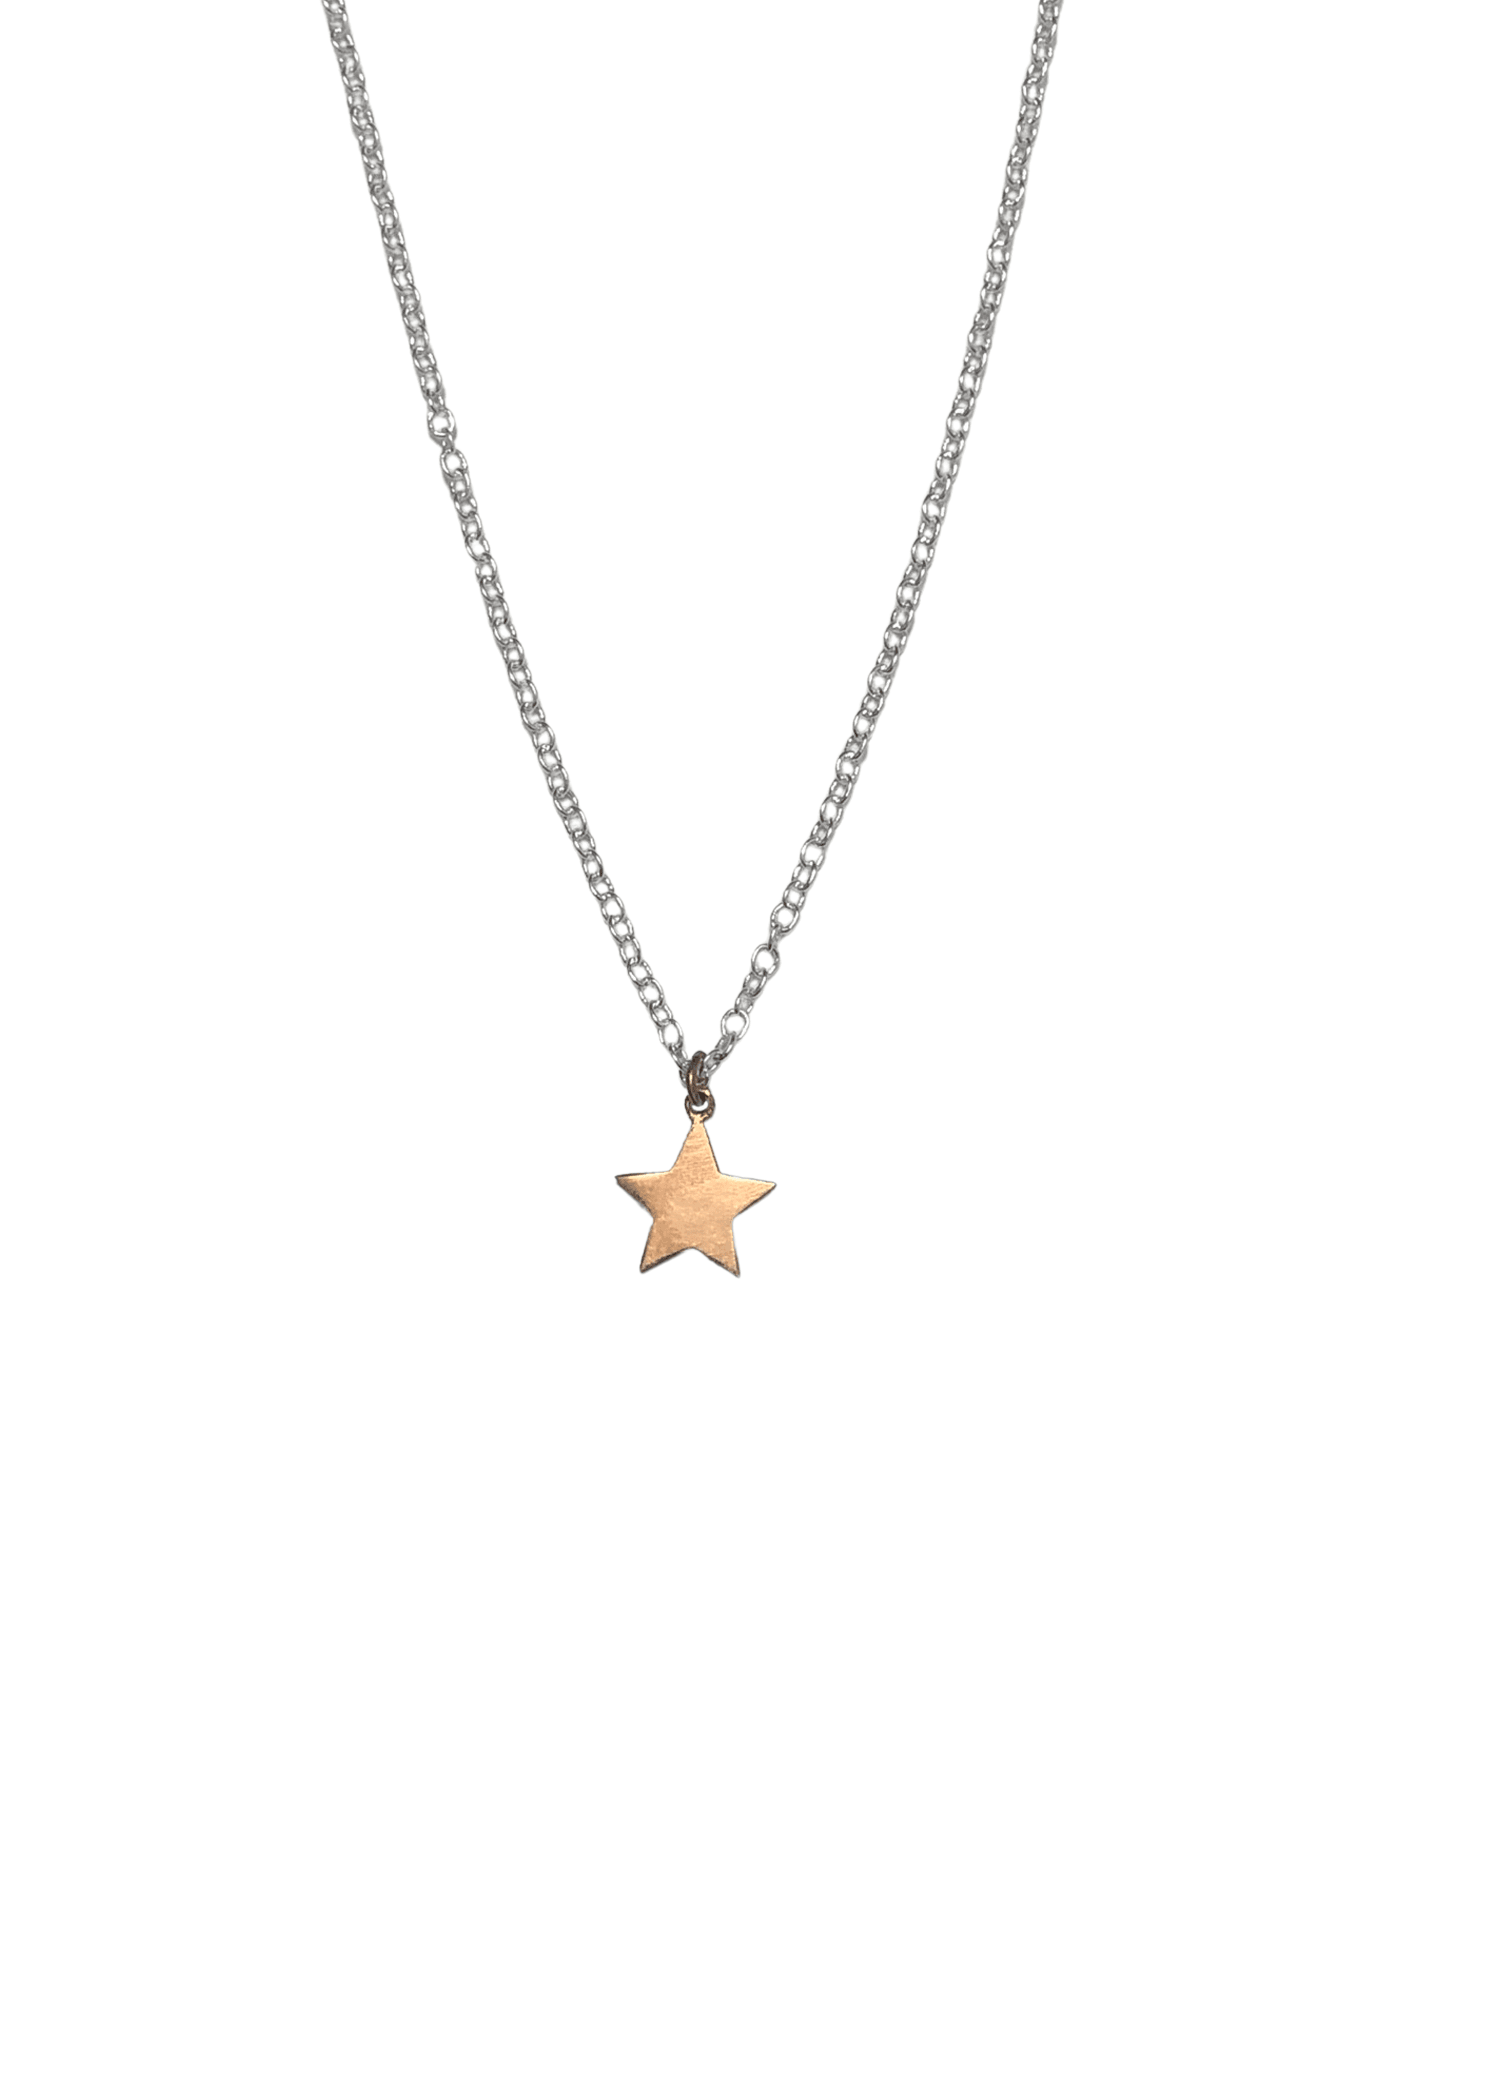 Star Charm Necklace - Silver/Rose Vermeil - offe market